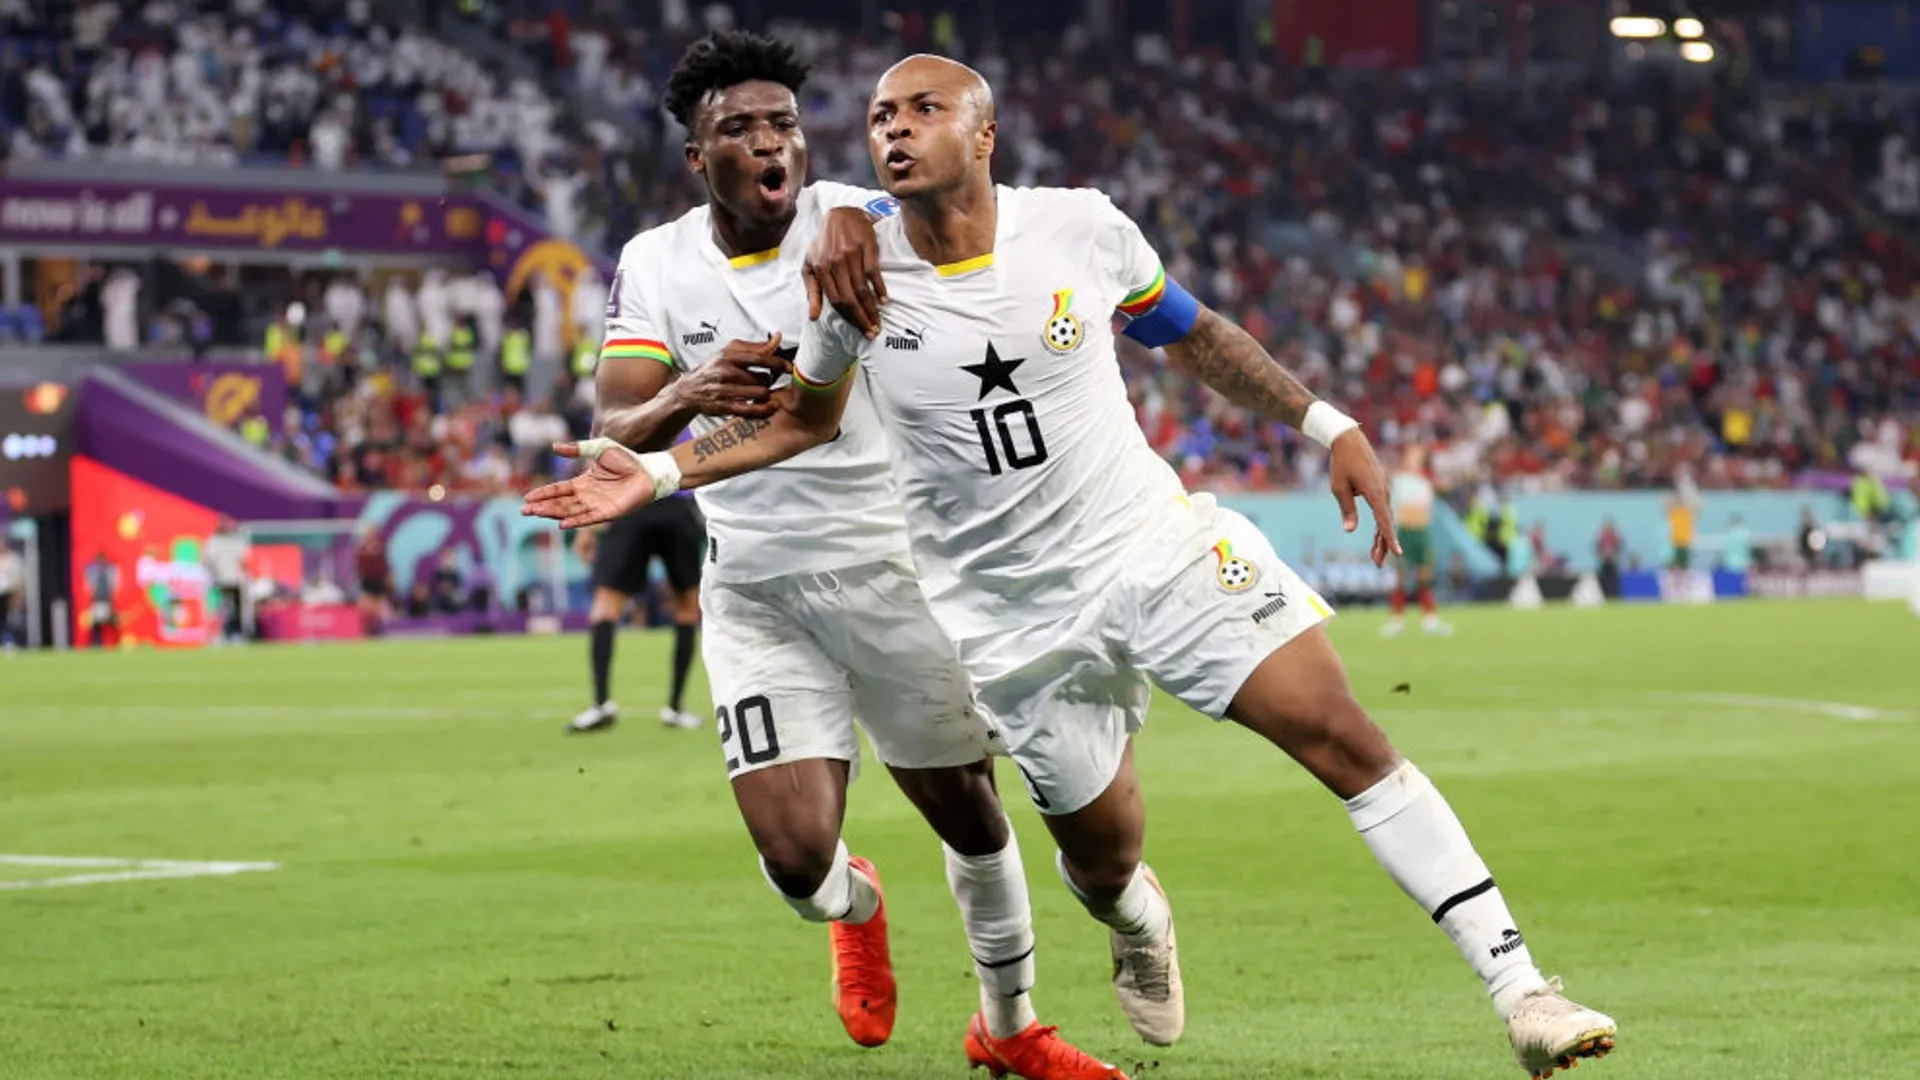 Andre Ayew ruled out of Angola clash due to injury